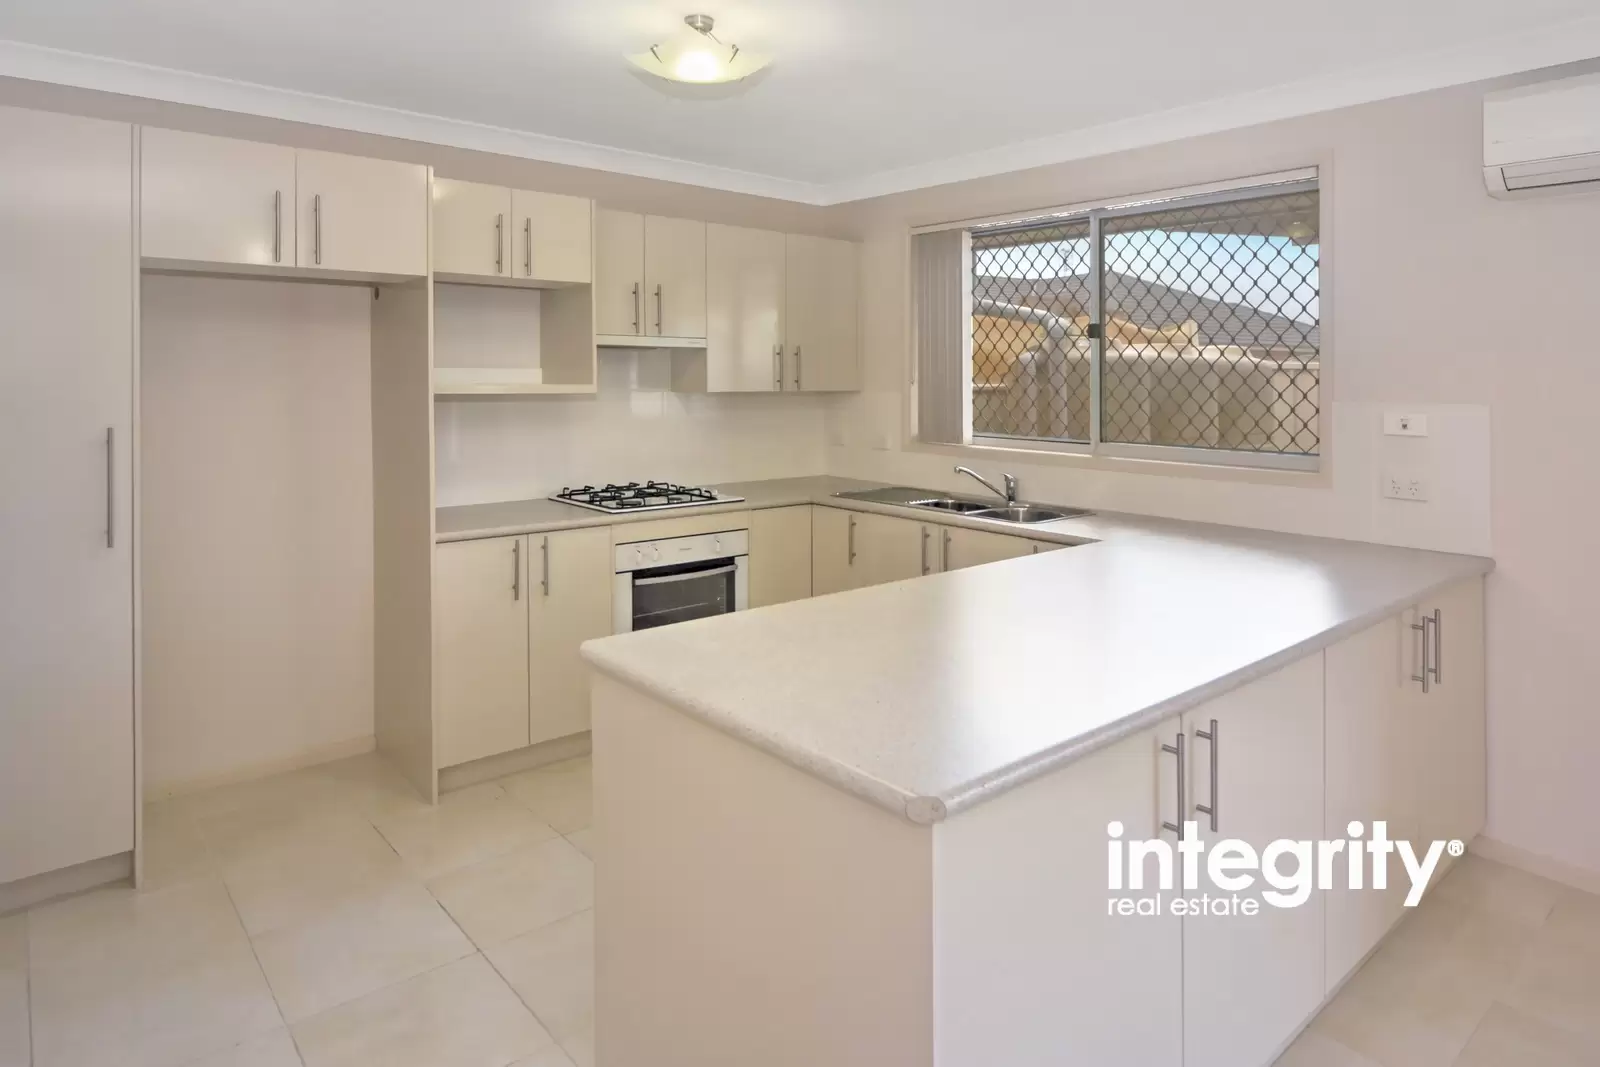 4/13 Hannah Place, Worrigee Sold by Integrity Real Estate - image 2